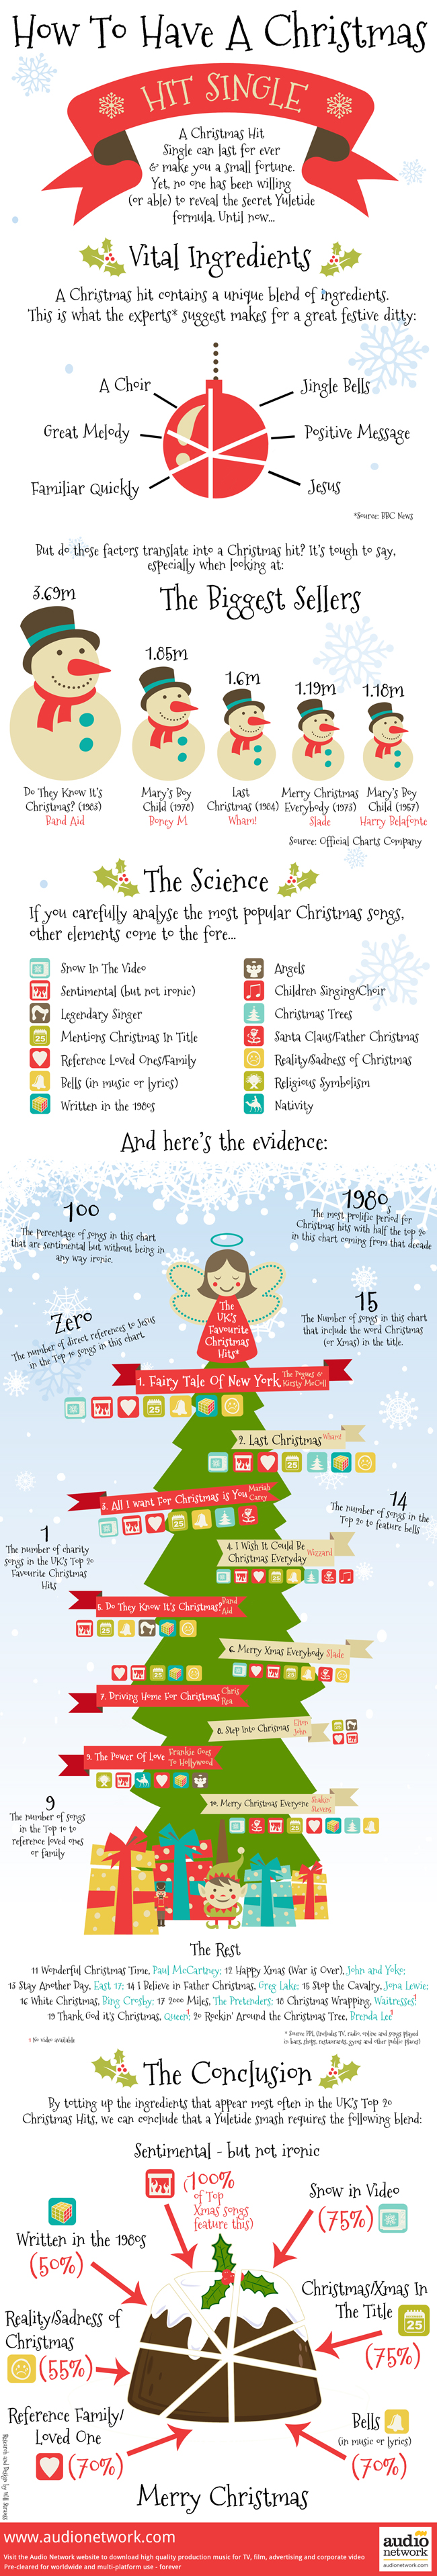 How to Have a Christmas Hit Single Infographic